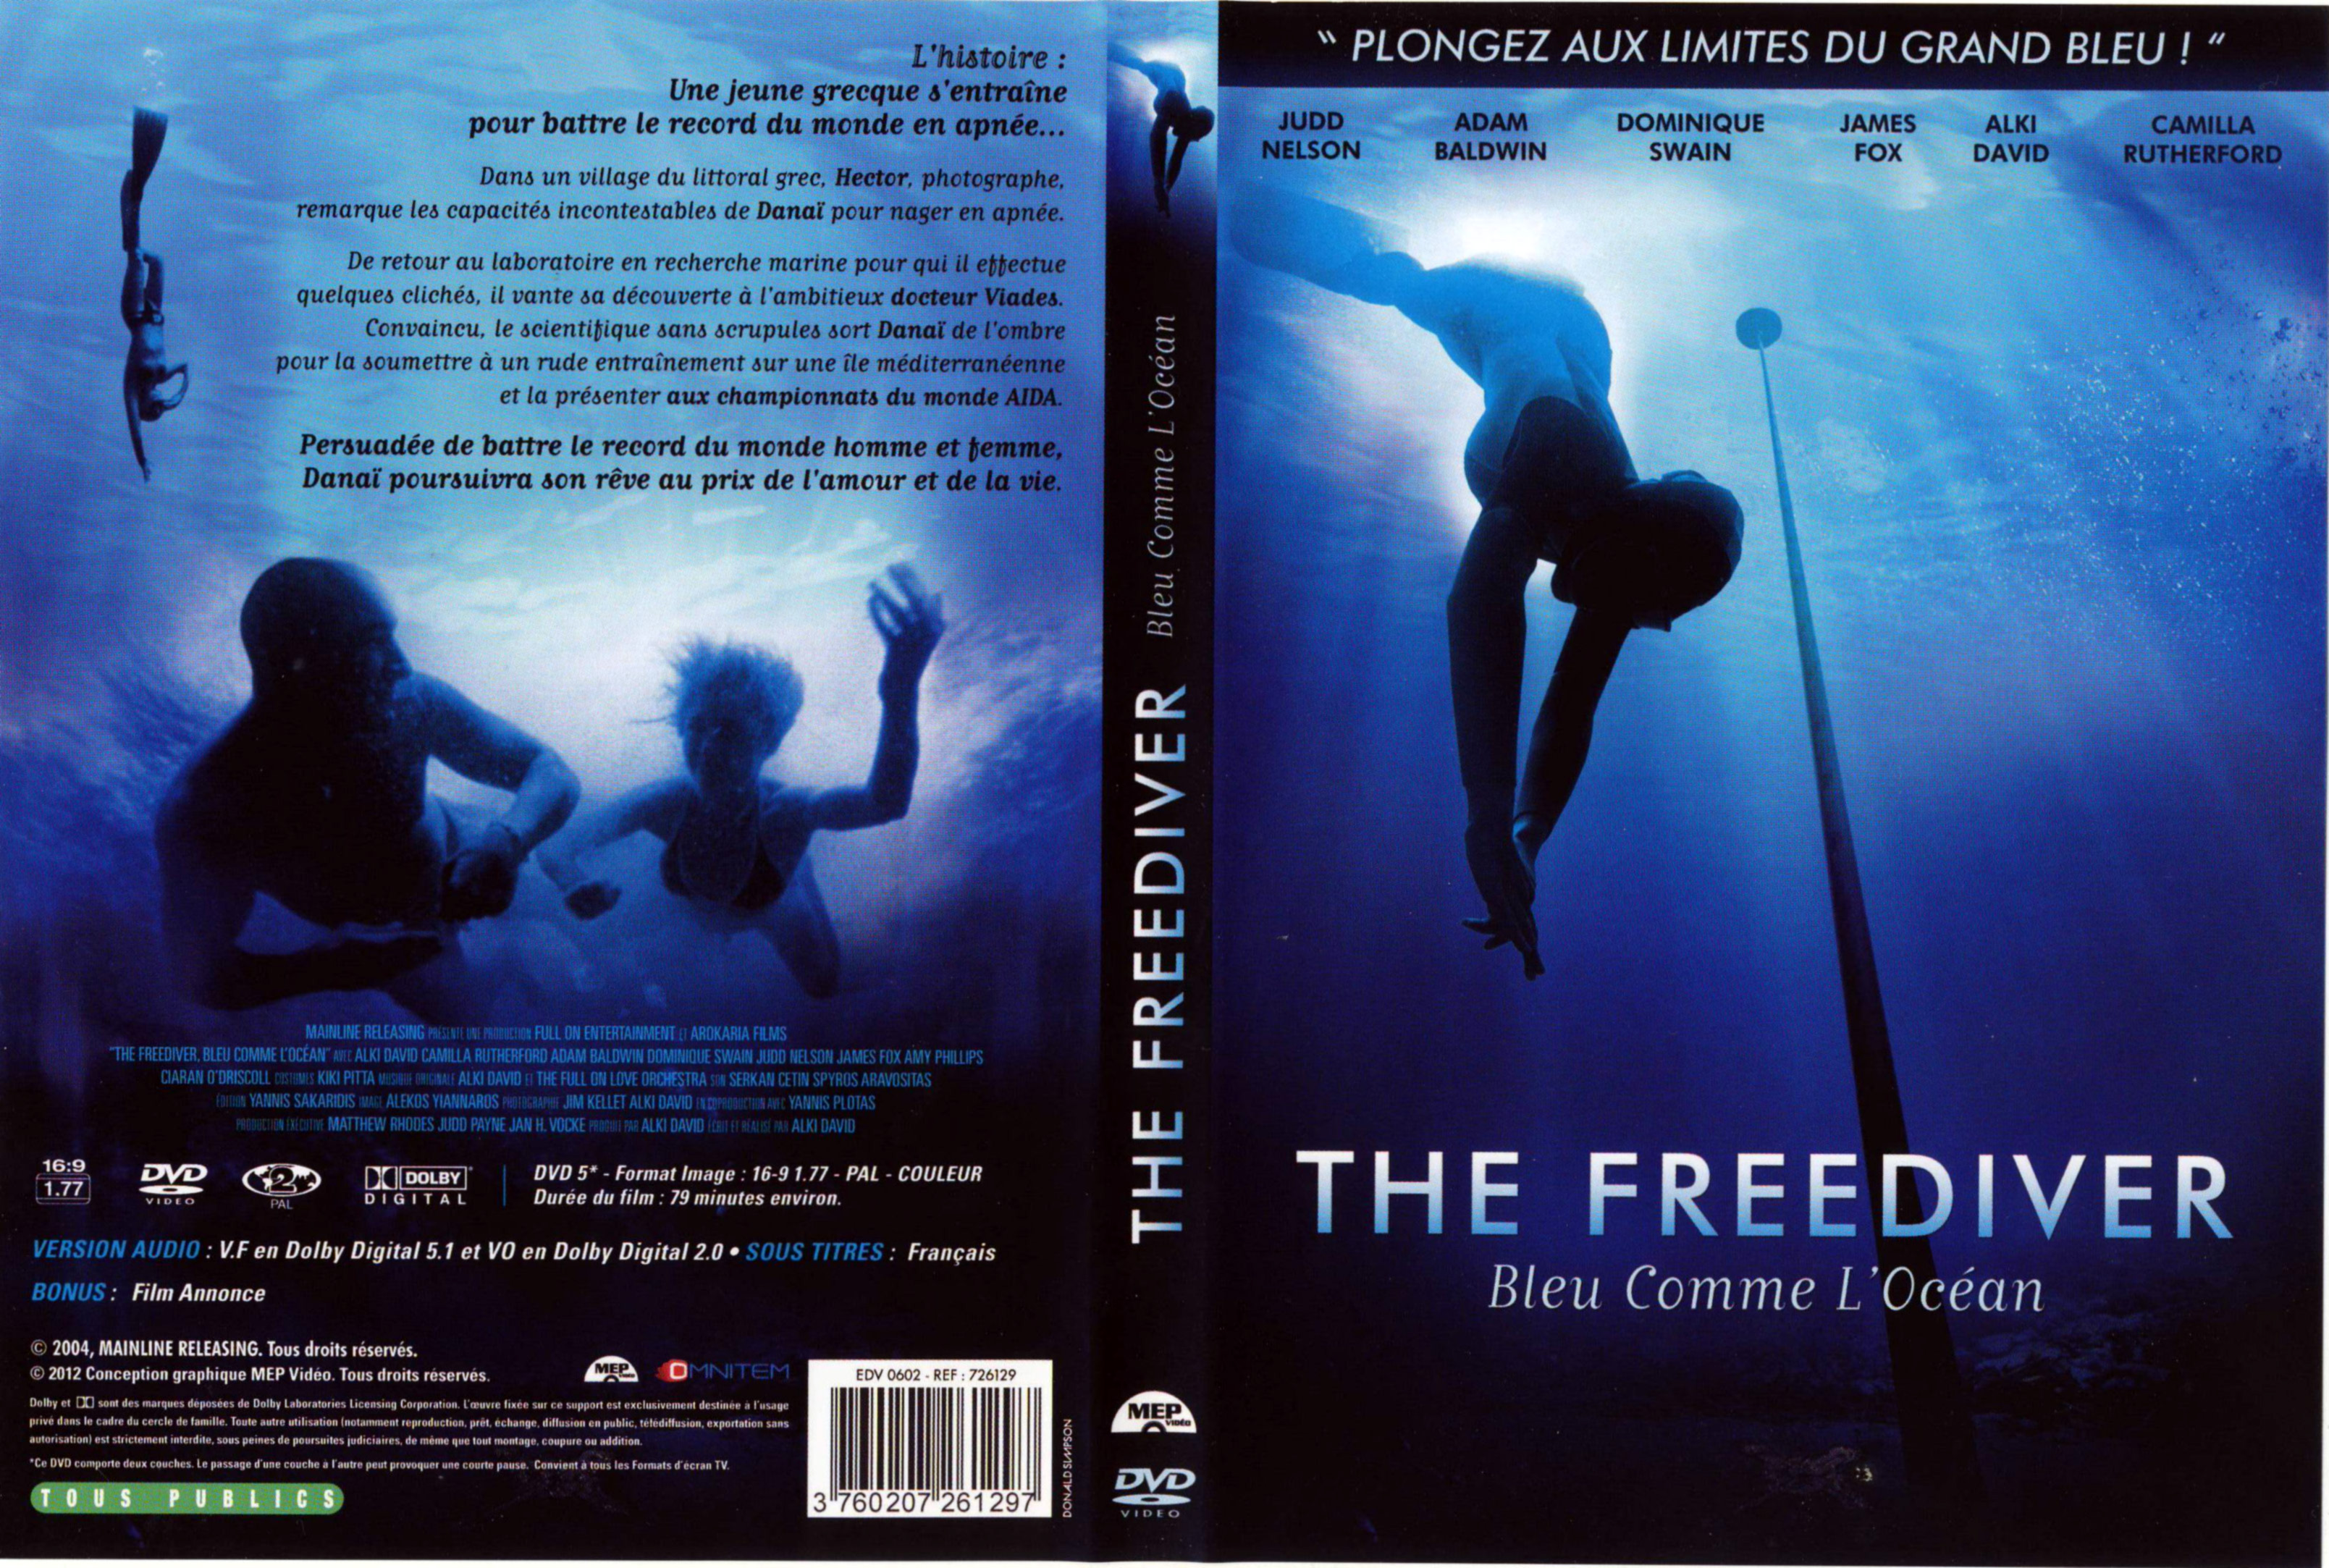 Jaquette DVD The freediver